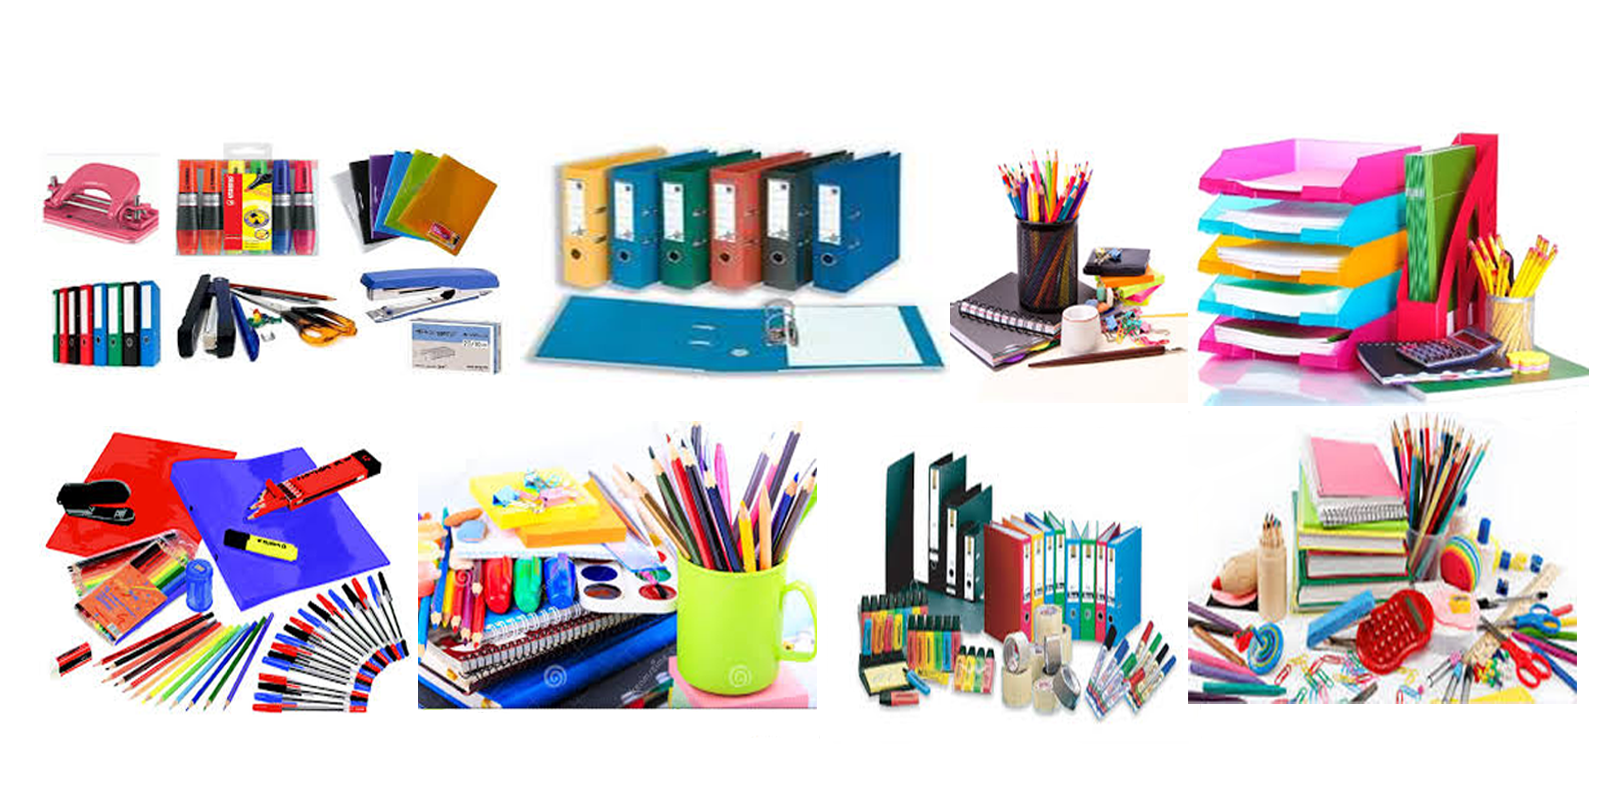 We supply all Kinds of Office & School Stationary